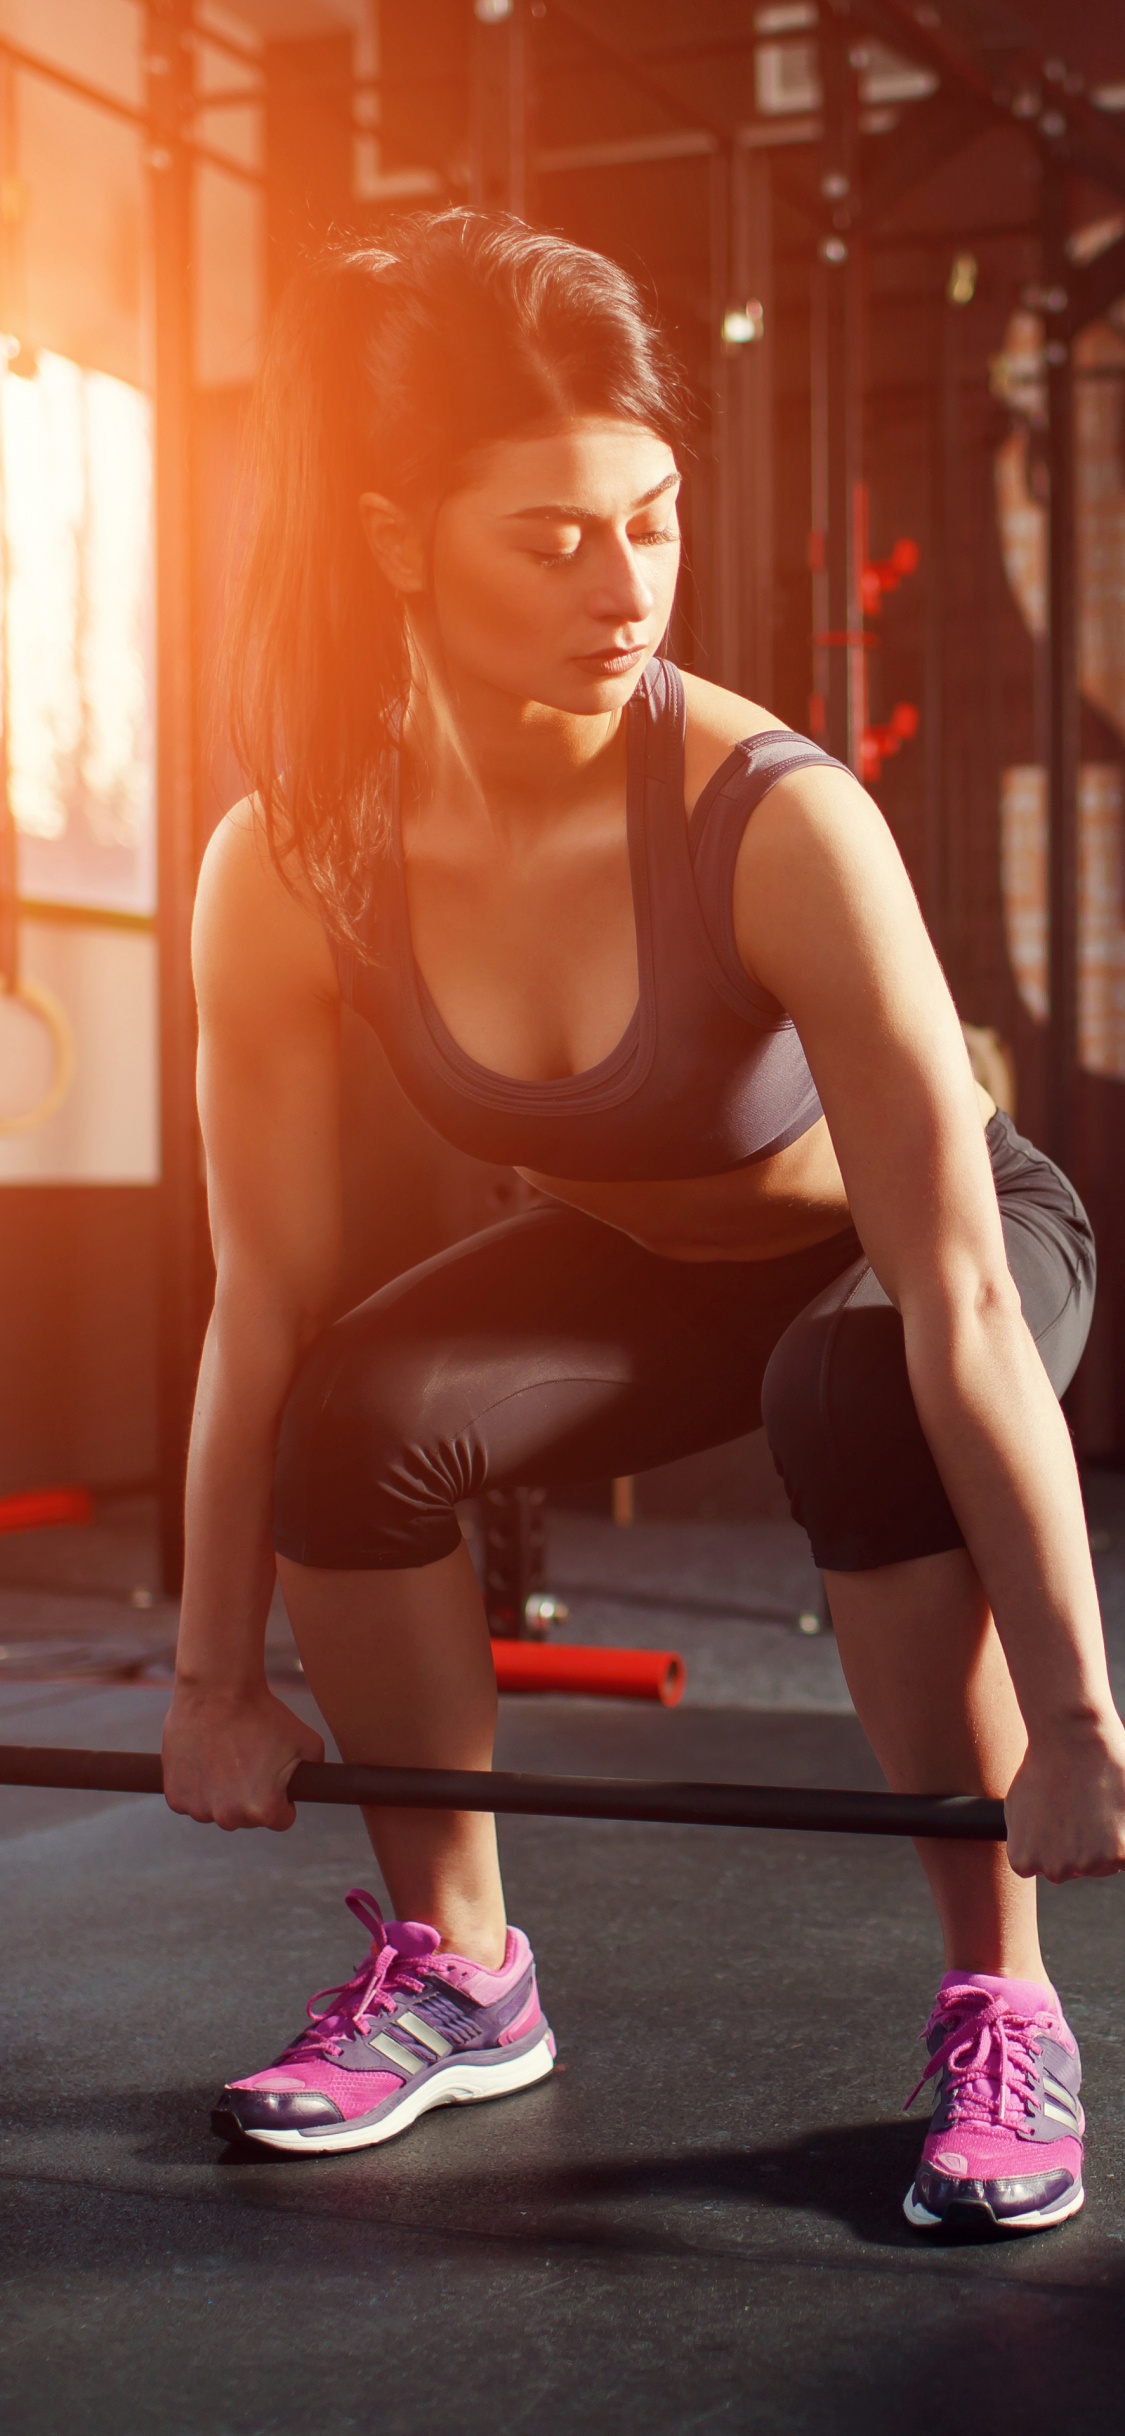 Woman in Black Tank Top and Black Leggings Doing Exercise. Wallpaper in 1125x2436 Resolution